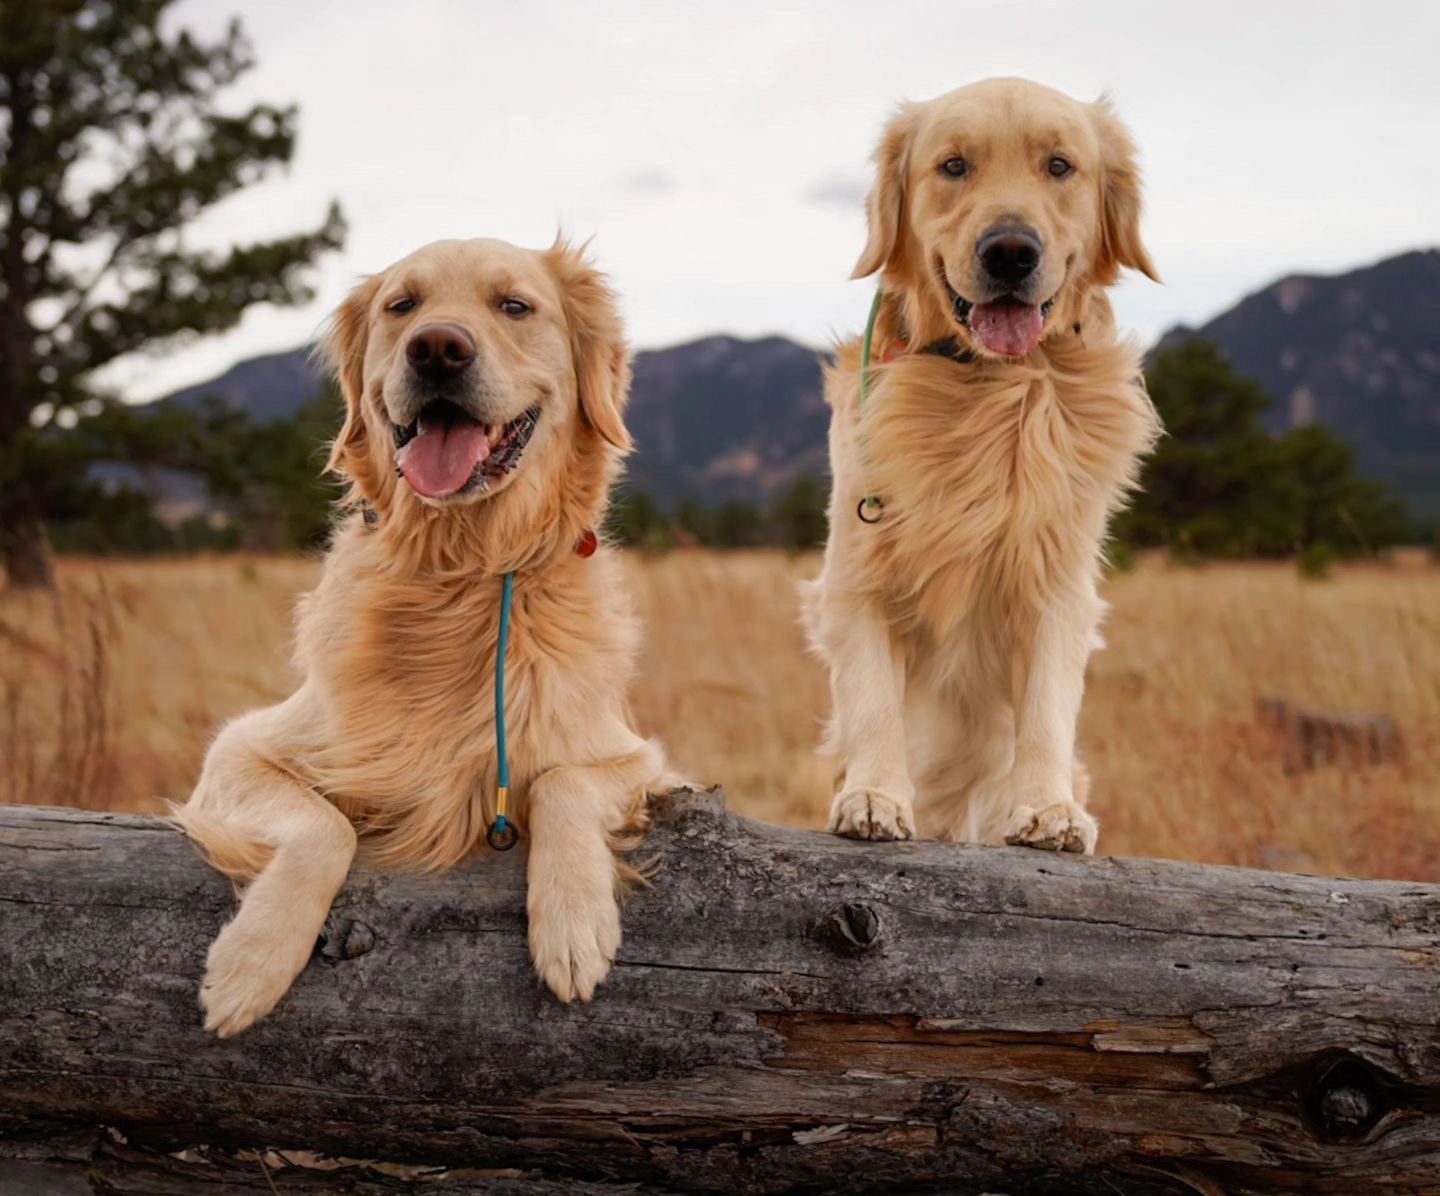 There's no better way to celebrate National Pet Day than by hitting the trails with your favorite pups 🐕

📸: @henryincolorado

#TriumphTogether #TriumphPack #NationalPetDay #Twinning